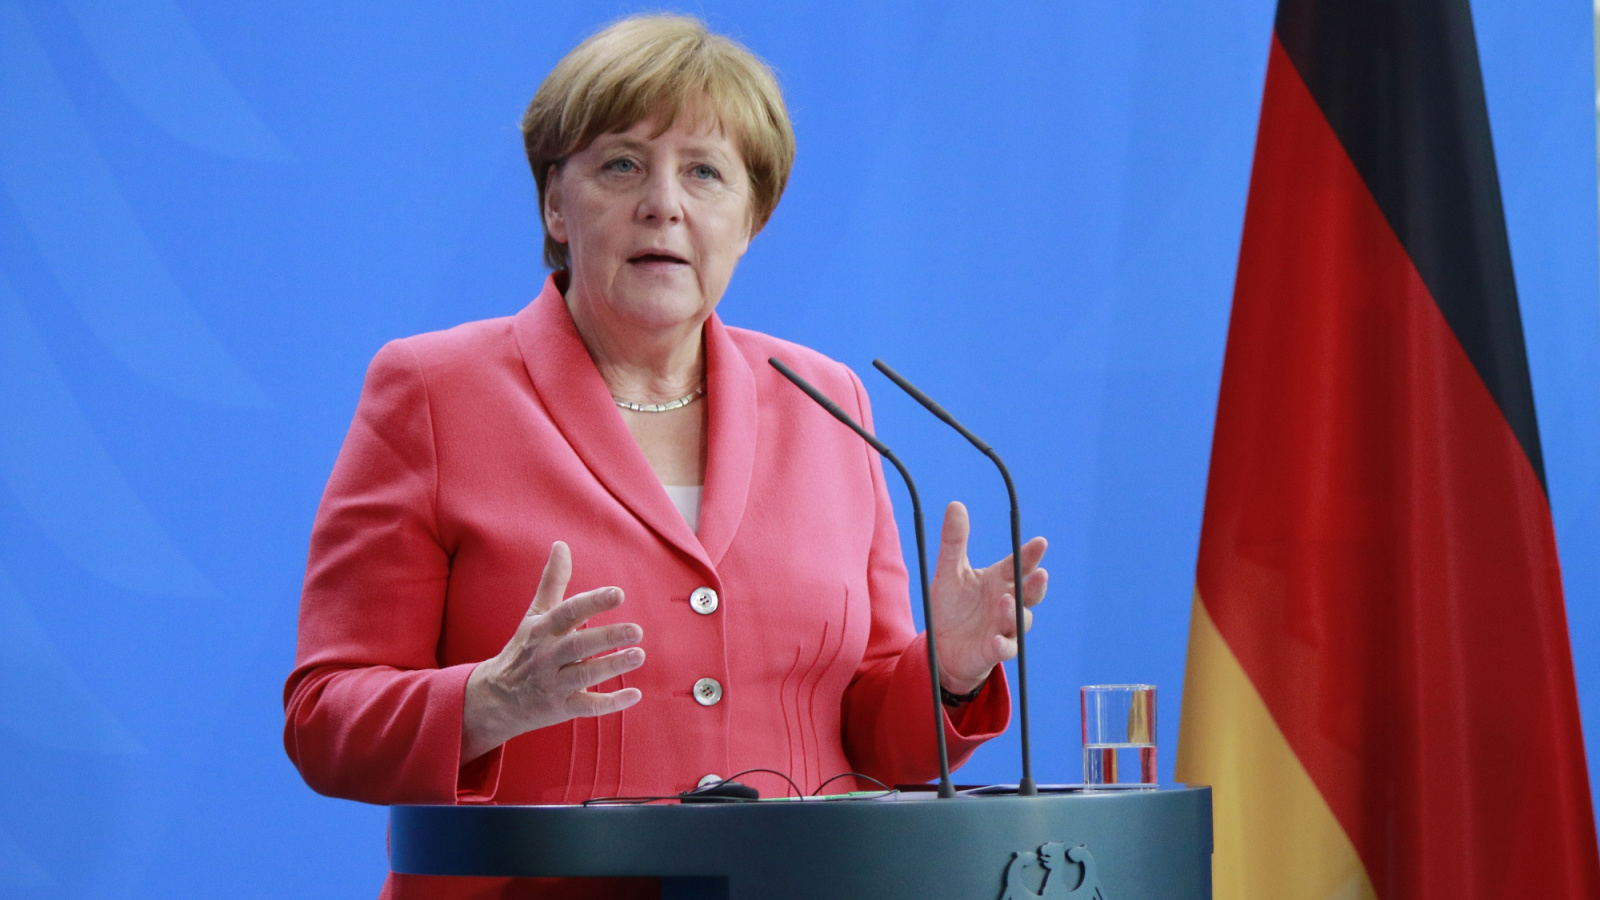 image credit: 360b/Shutterstock <p><span>Angela Merkel, Germany’s first female Chancellor, led with a remarkable combination of resilience and pragmatism. She navigated numerous global crises during her tenure, setting a benchmark for crisis management. Merkel’s leadership style, blending caution with decisiveness, has been a beacon of stability. She leaves behind a legacy of unwavering commitment to her country and Europe.</span></p>